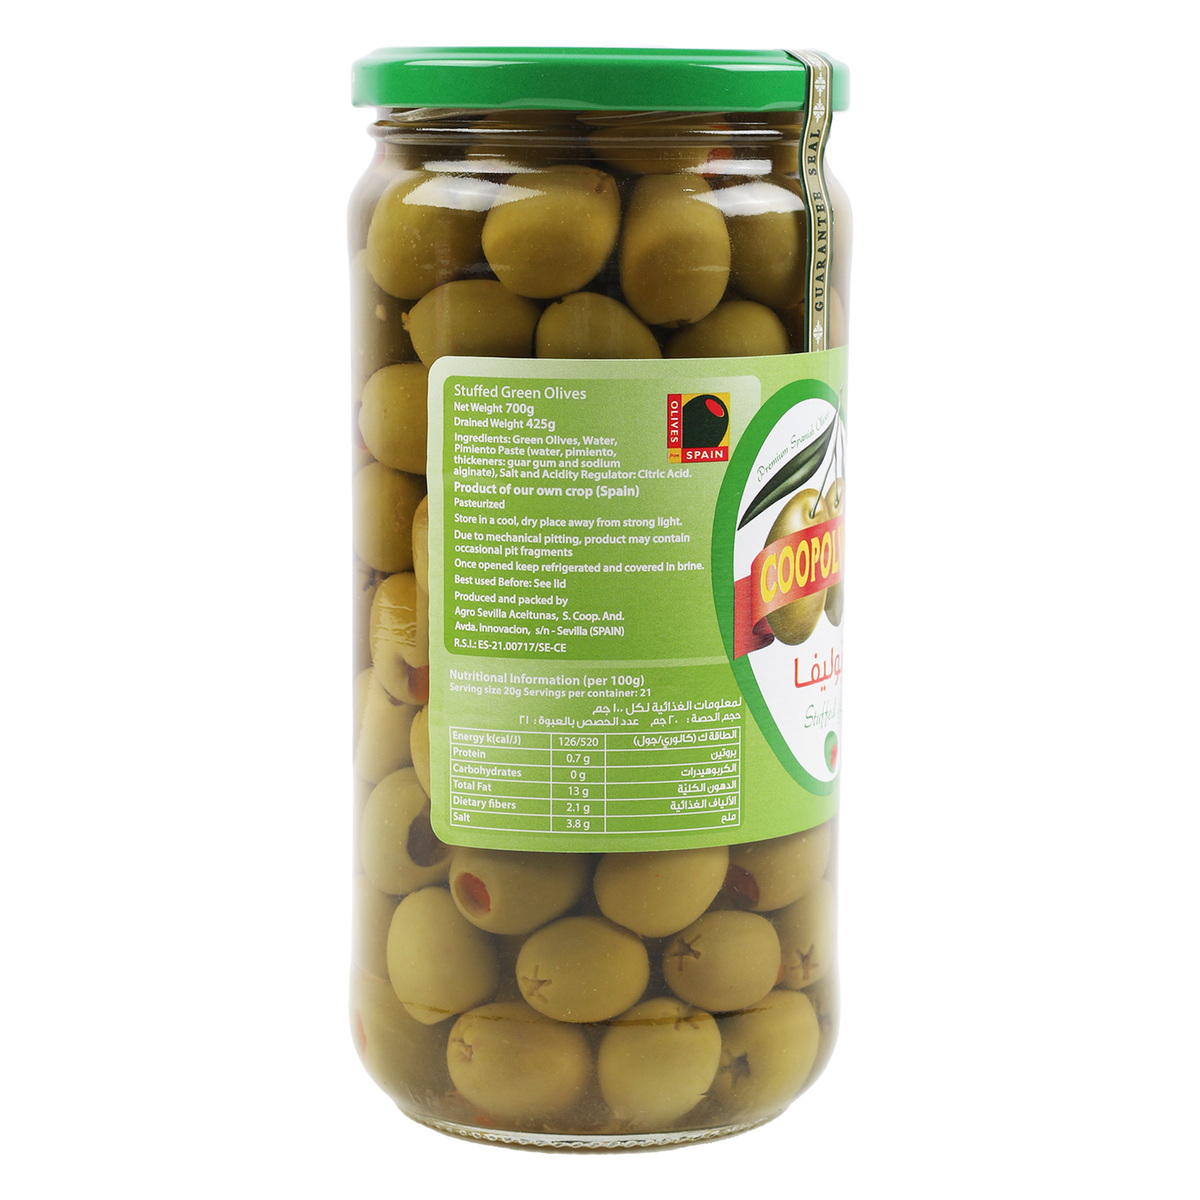 Coopoliva Stuffed Green Olives 700g